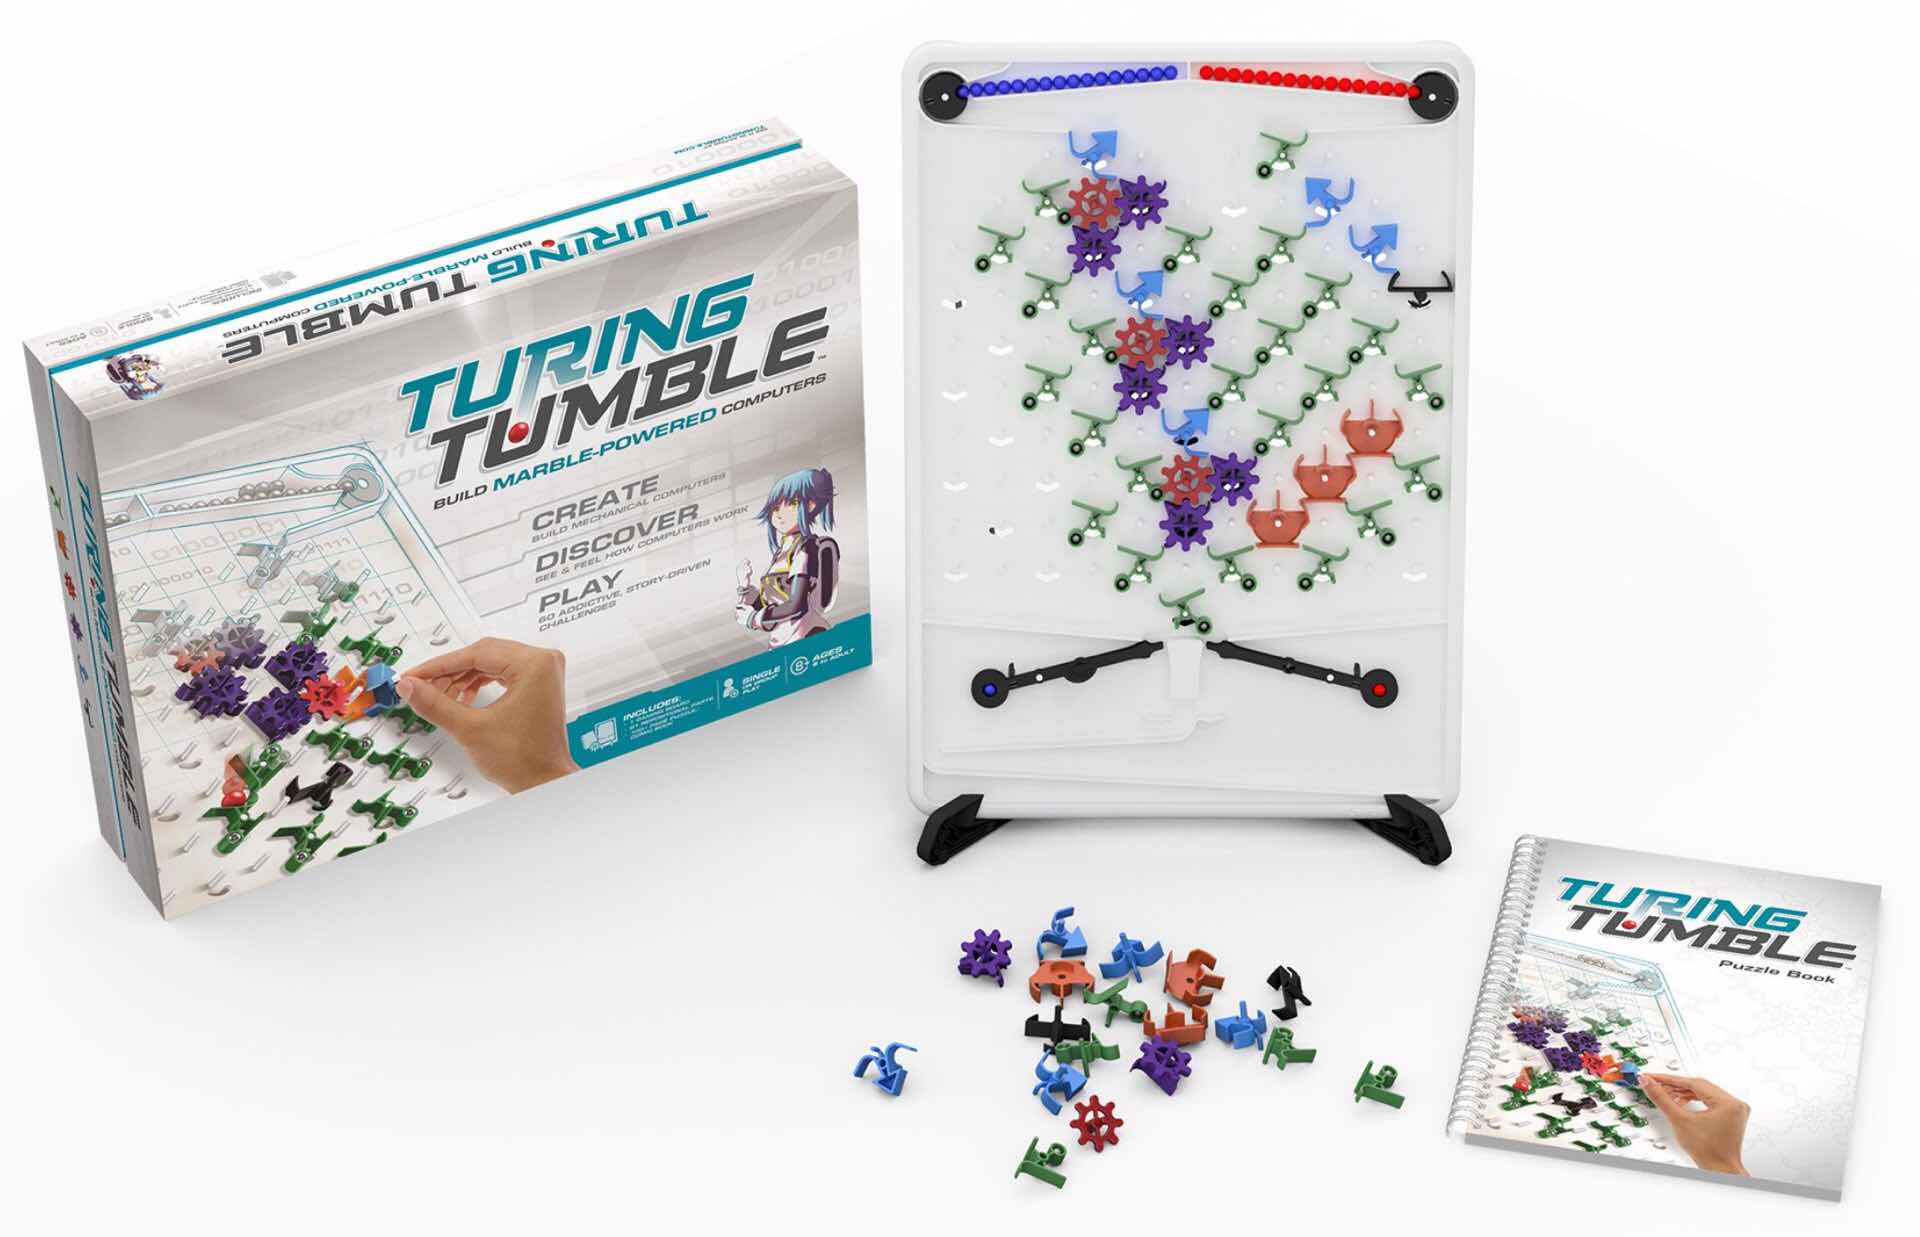 Turing Tumble' — Build Marble-Powered — Tools and Toys